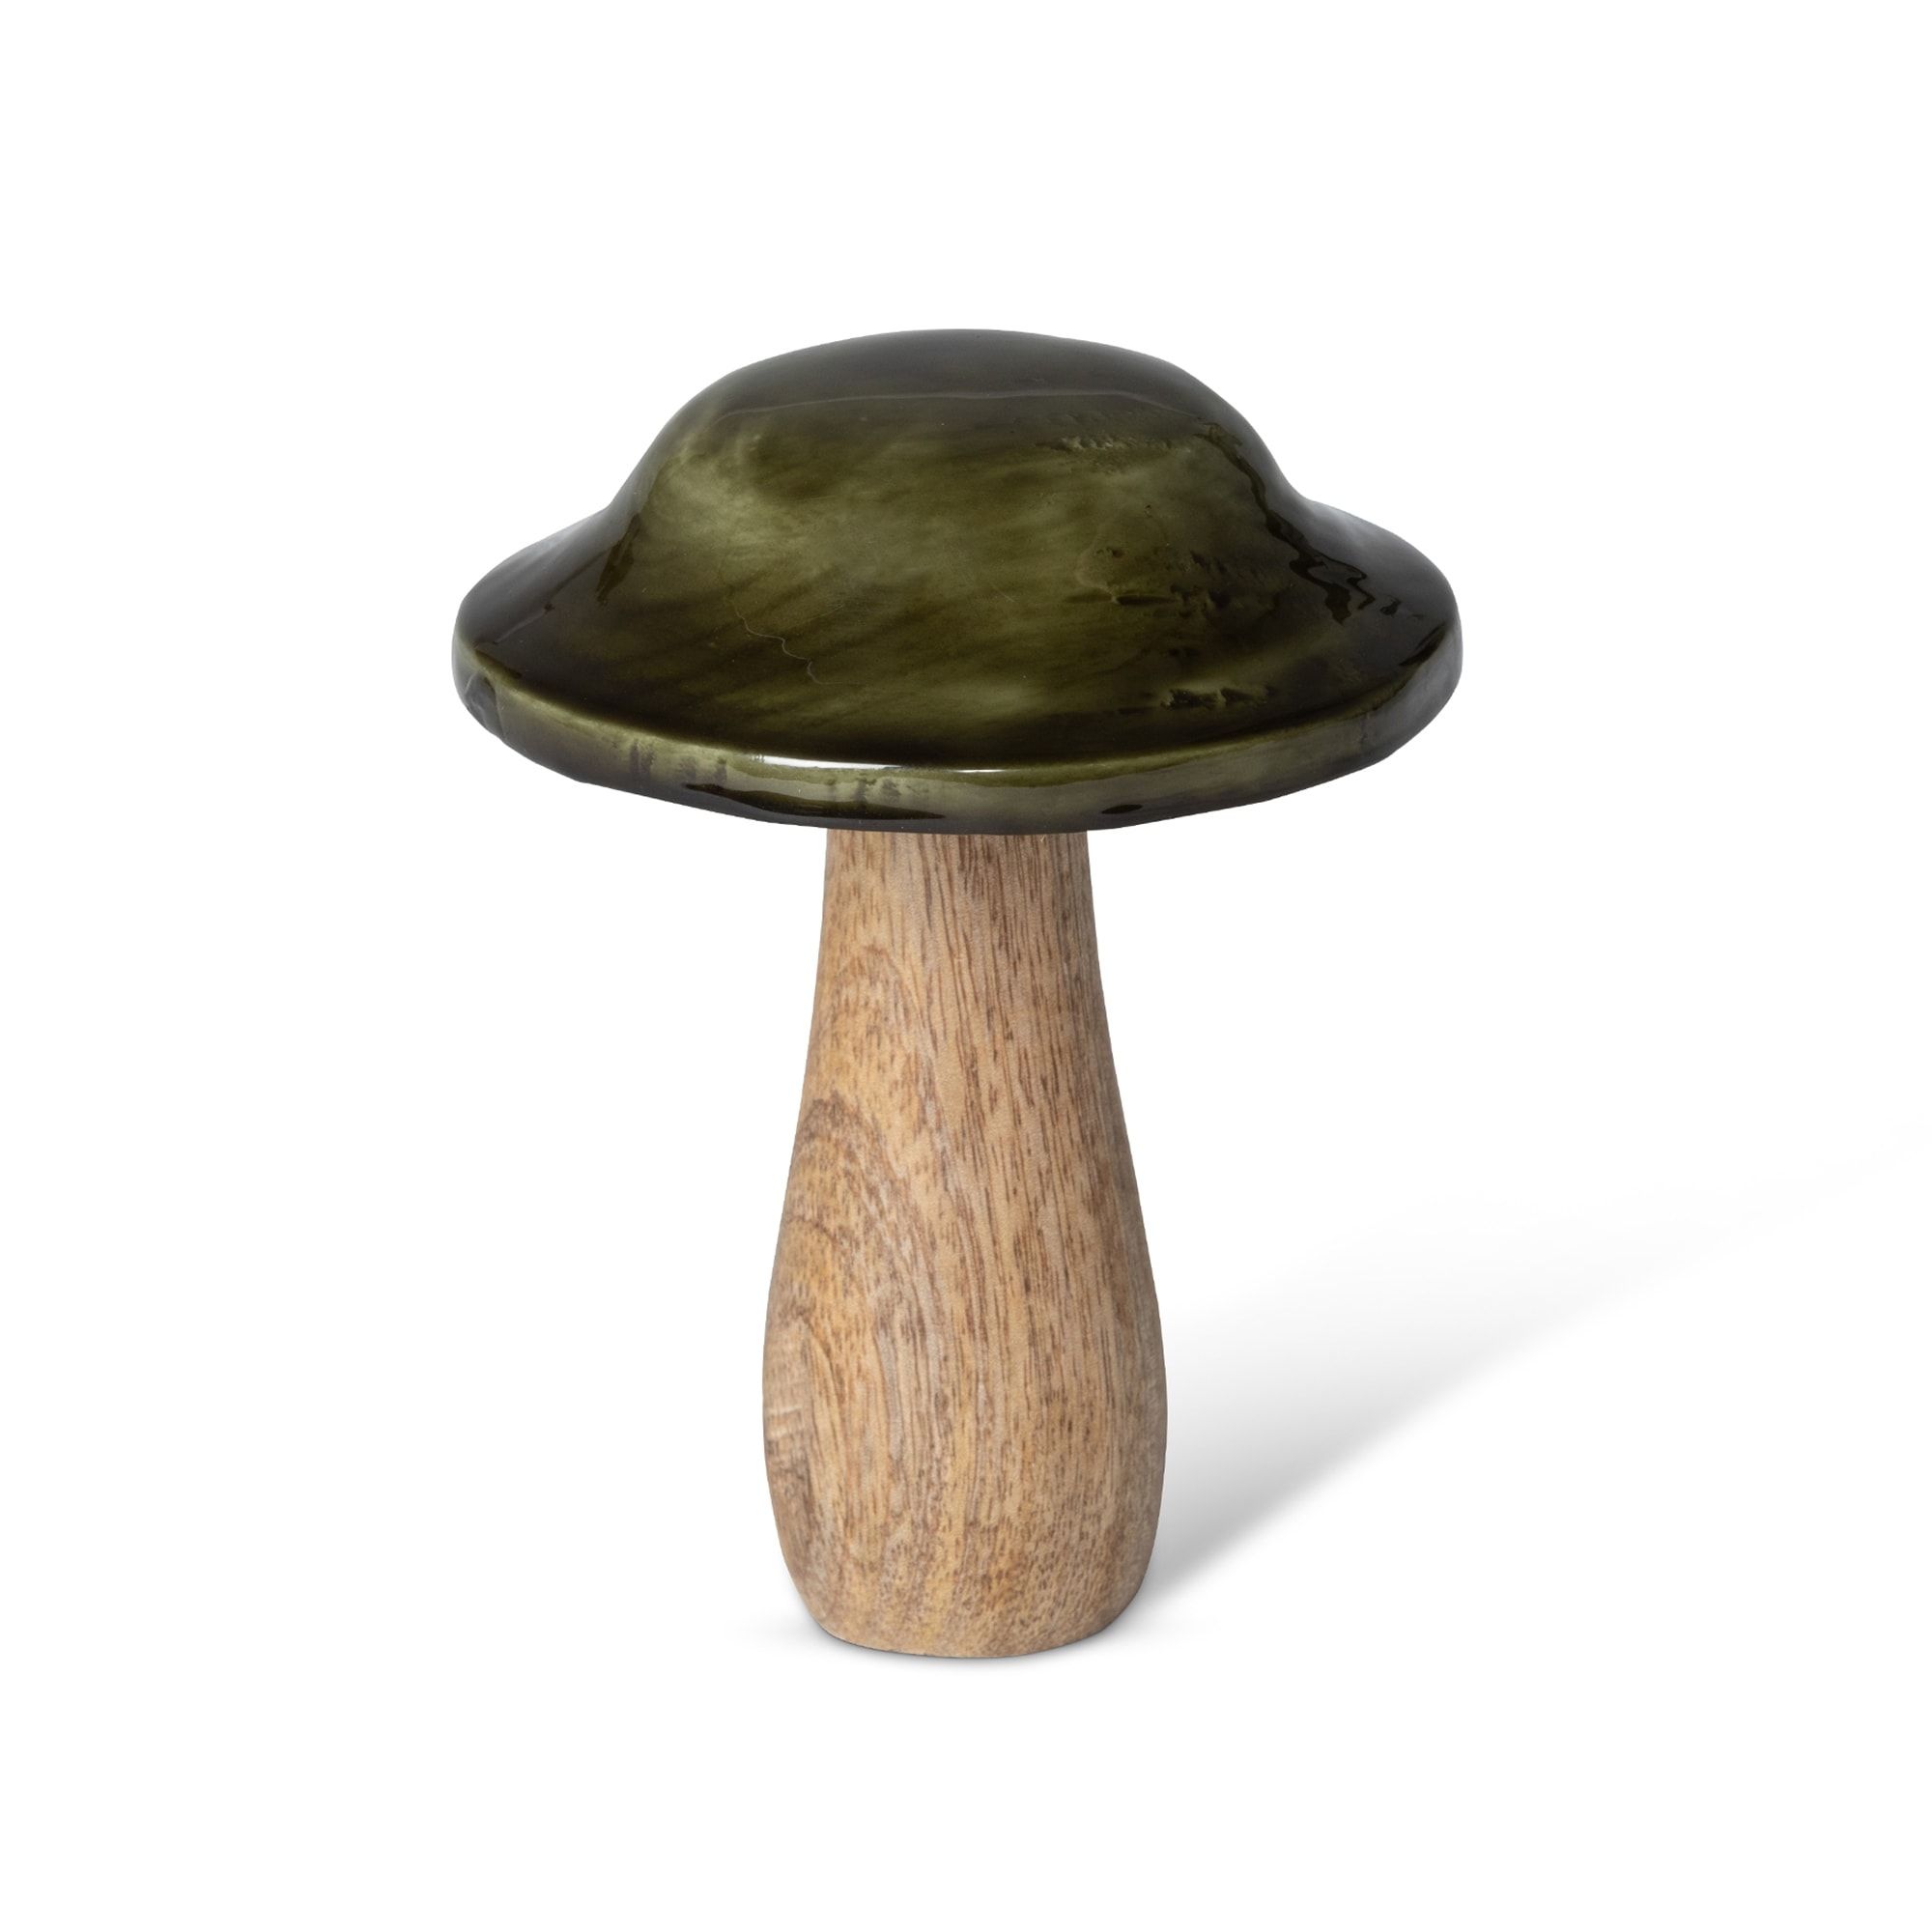 Forest Green Lacquered Wooden Mushroom | Bed Bath & Beyond